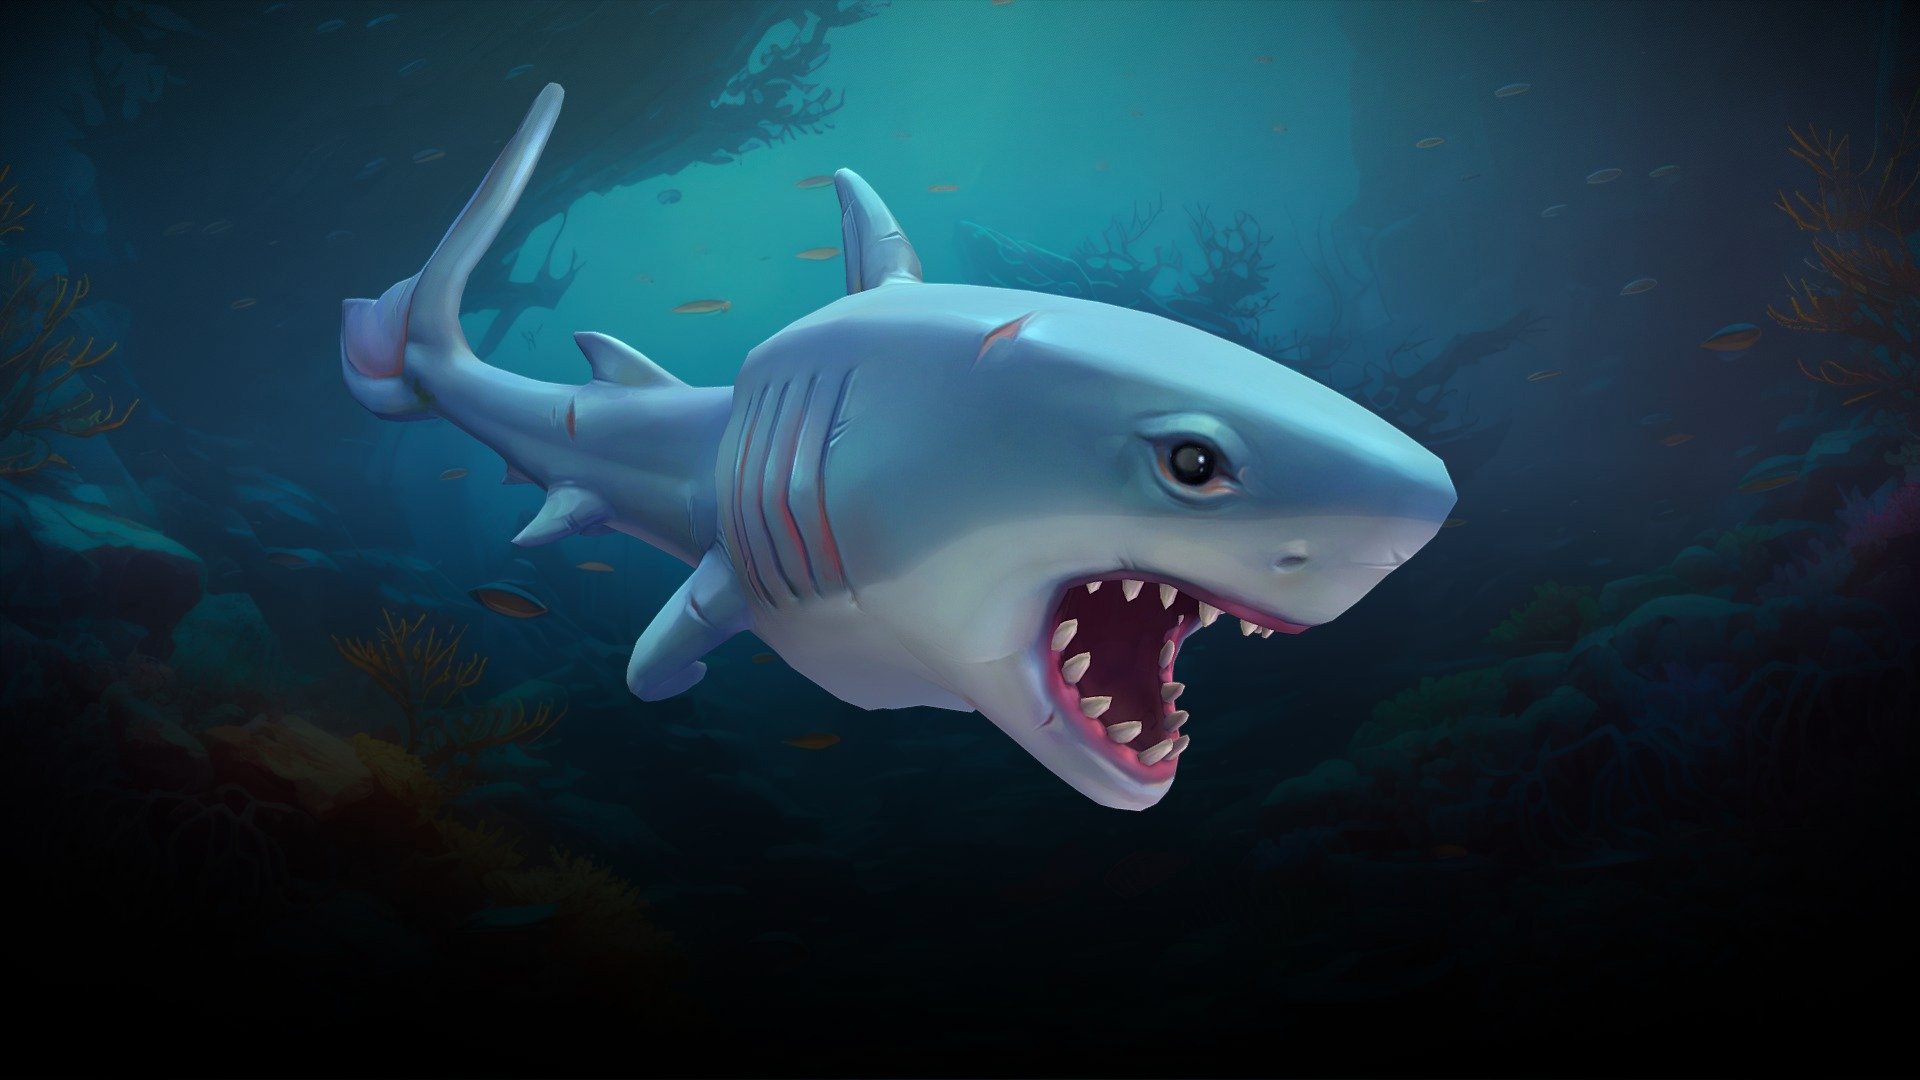 Stylized character for a project.

Software used: Zbrush, Autodesk Maya, Autodesk 3ds Max, Substance Painter - Stylized Shark - 3D model by N-hance Studio (@Malice6731) 3d model